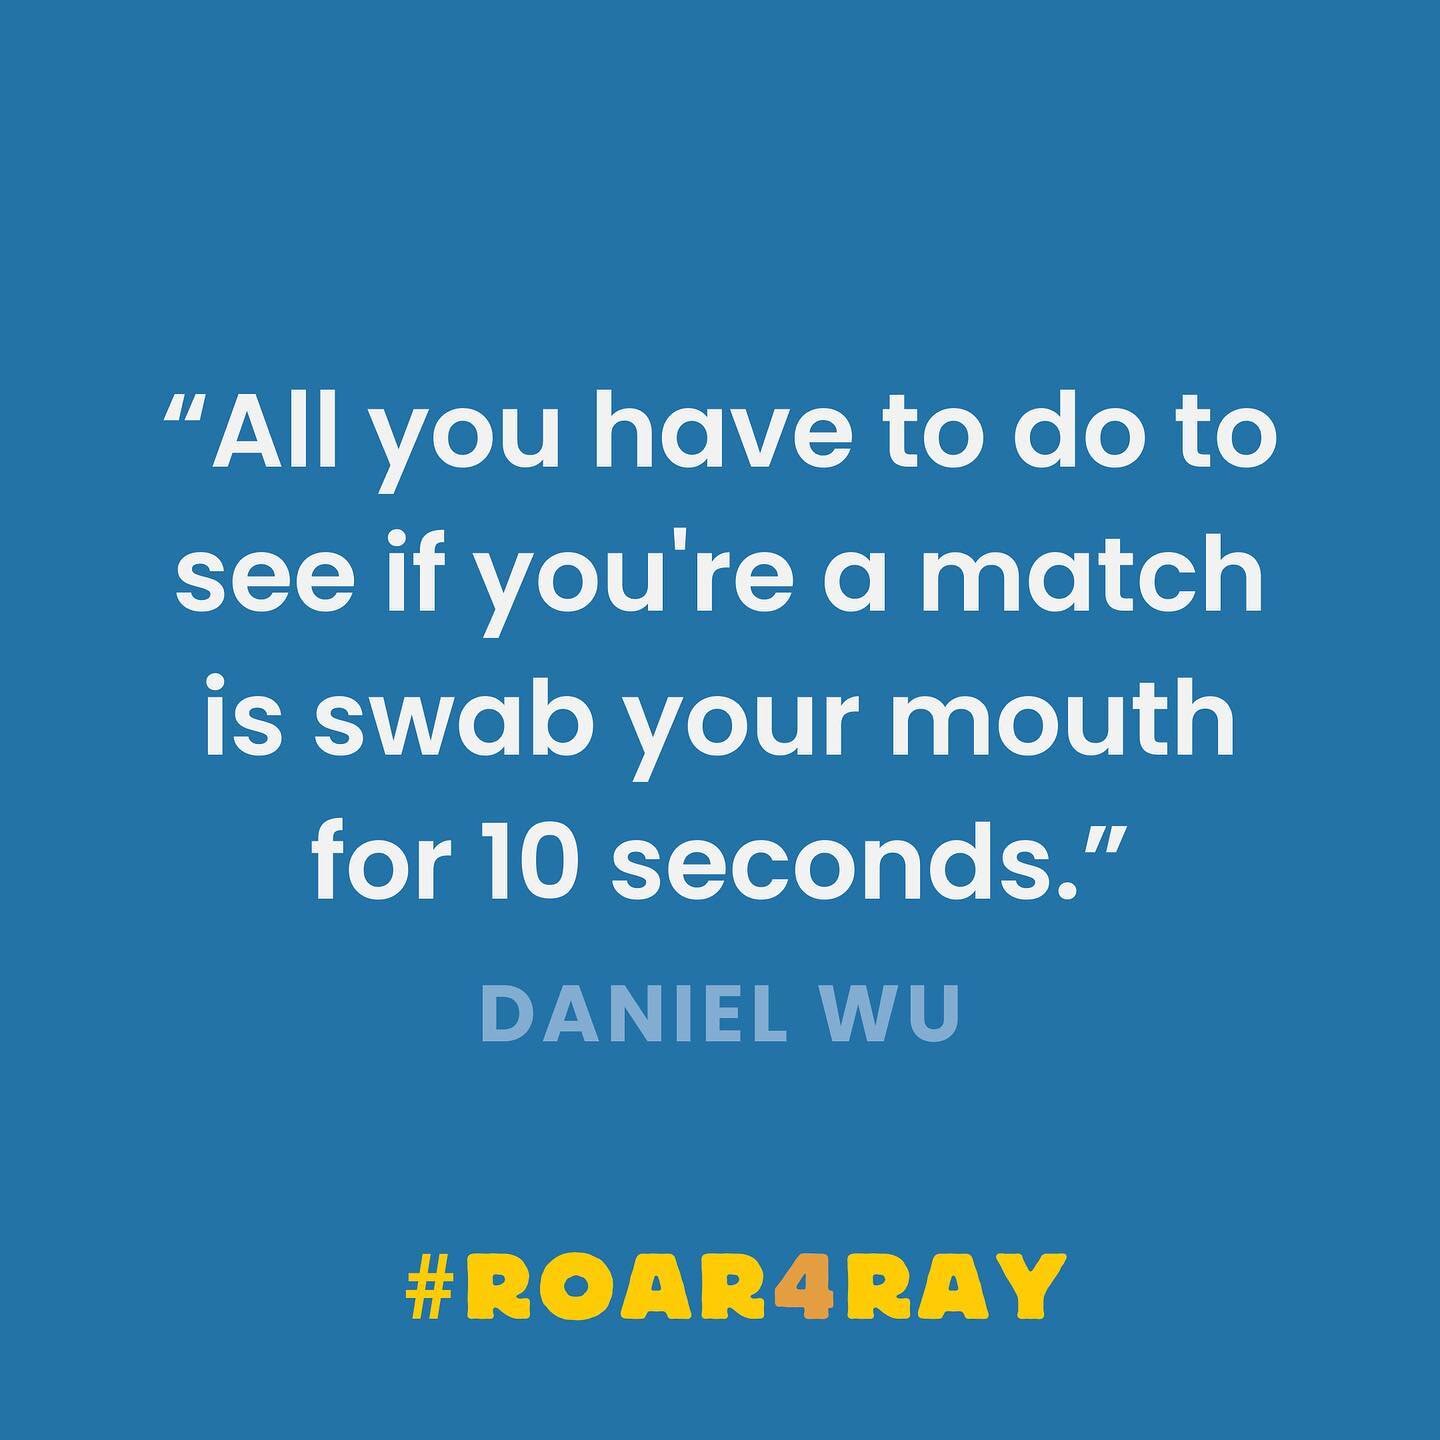 Signing up and taking a bone marrow test is a 10-second commitment. Once you register on roar4ray.org, you&rsquo;ll receive an at-home swab kit to swab each cheek for 10 seconds. That&rsquo;s it! That&rsquo;s all it takes to save a life. #Roar4Ray